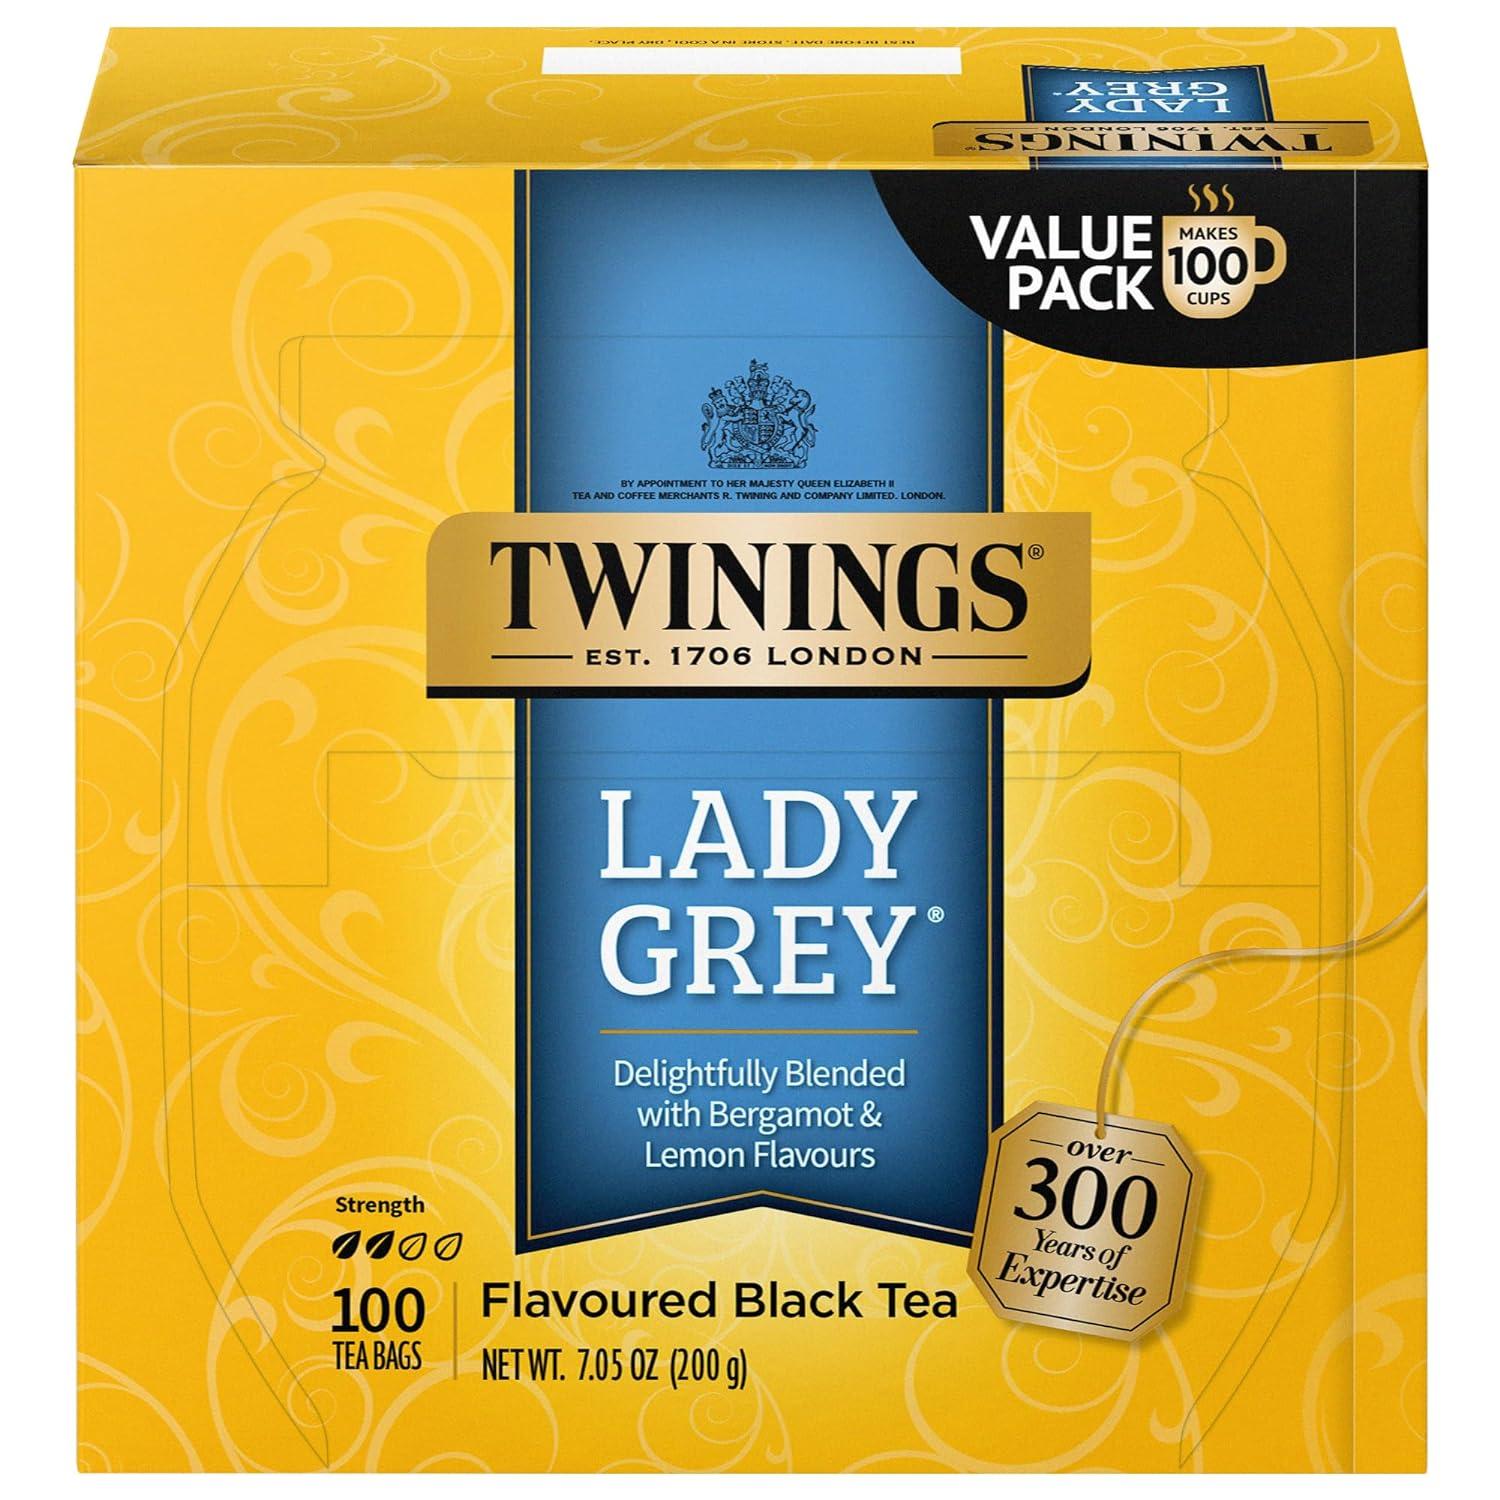 Twinings Lady Grey Black Tea 100 Pack for $6.65 Shipped